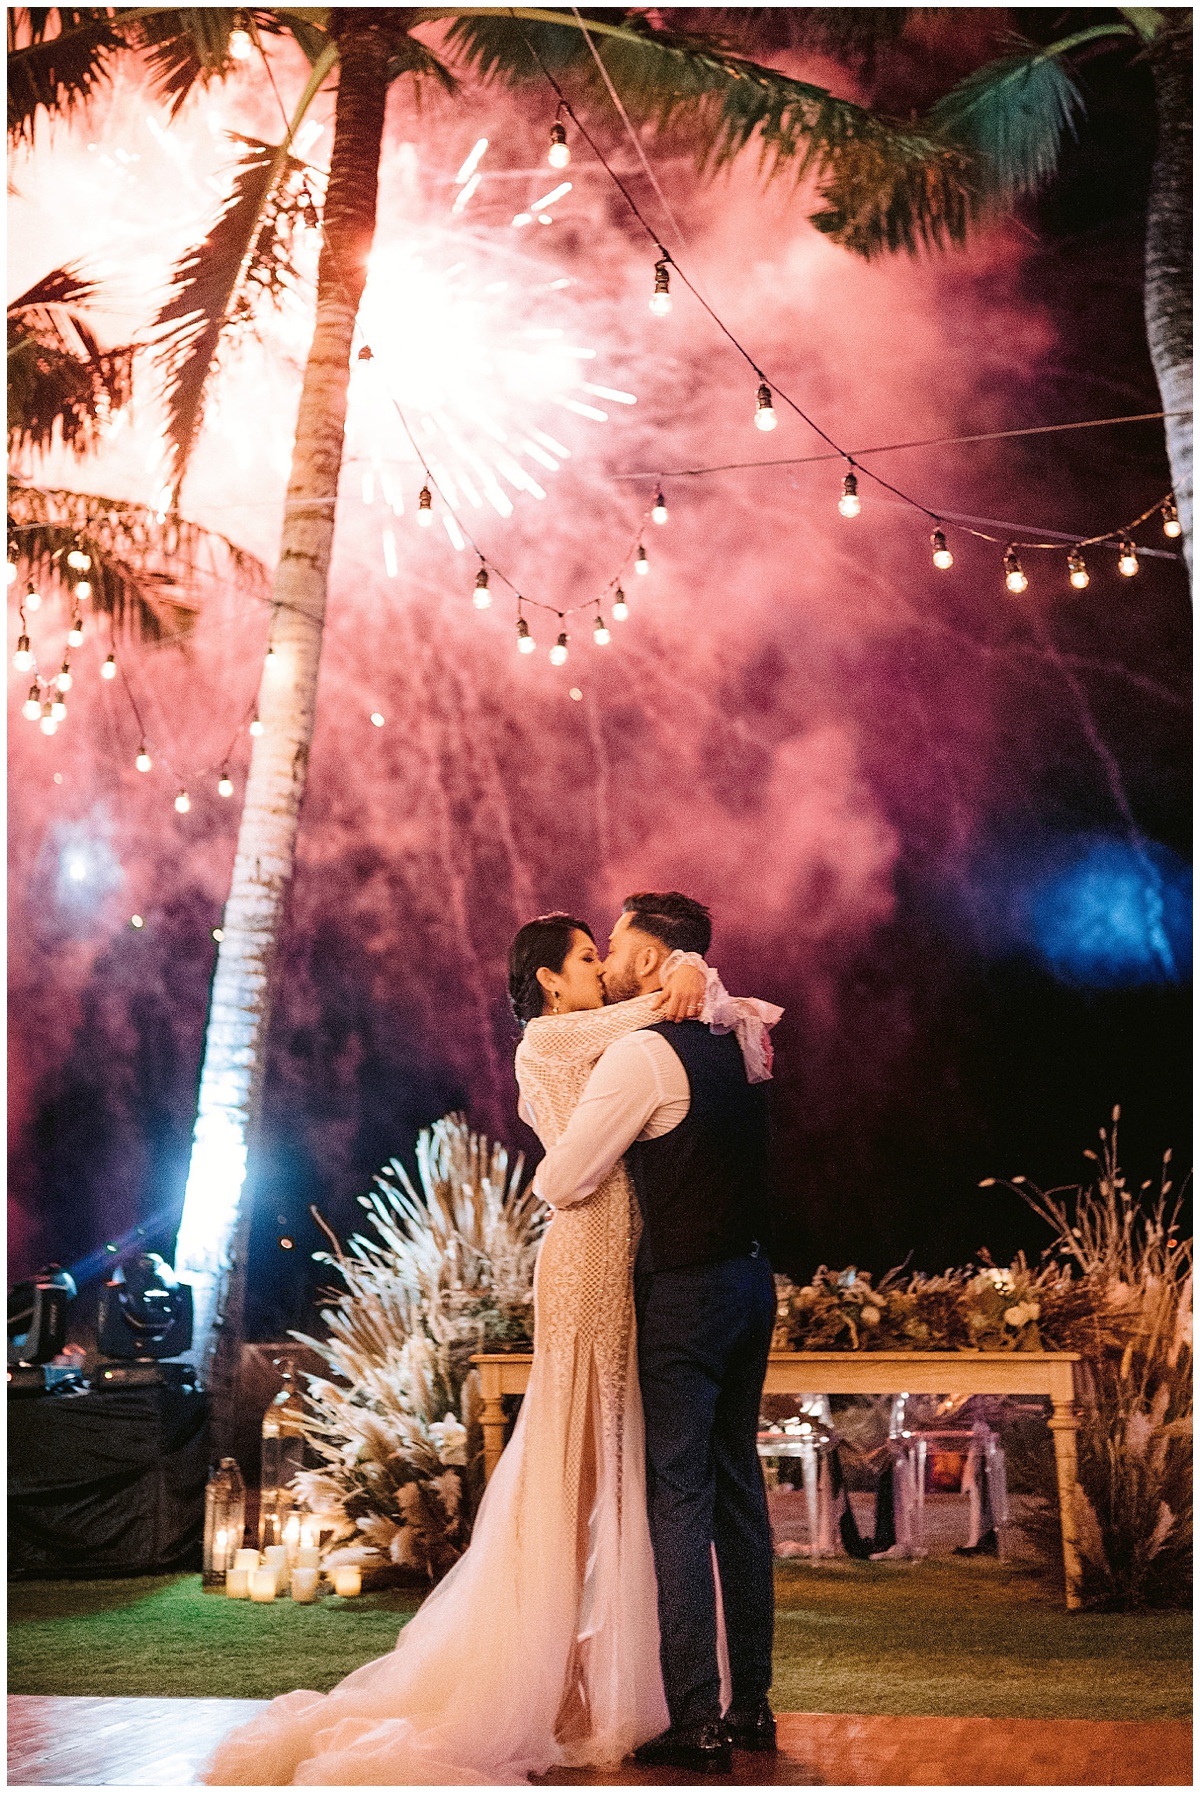 Bride and groom wrap their arms around each other and kiss underneath fireworks at their wedding in Bali. Editorial wedding image by Jenny Fu Studio